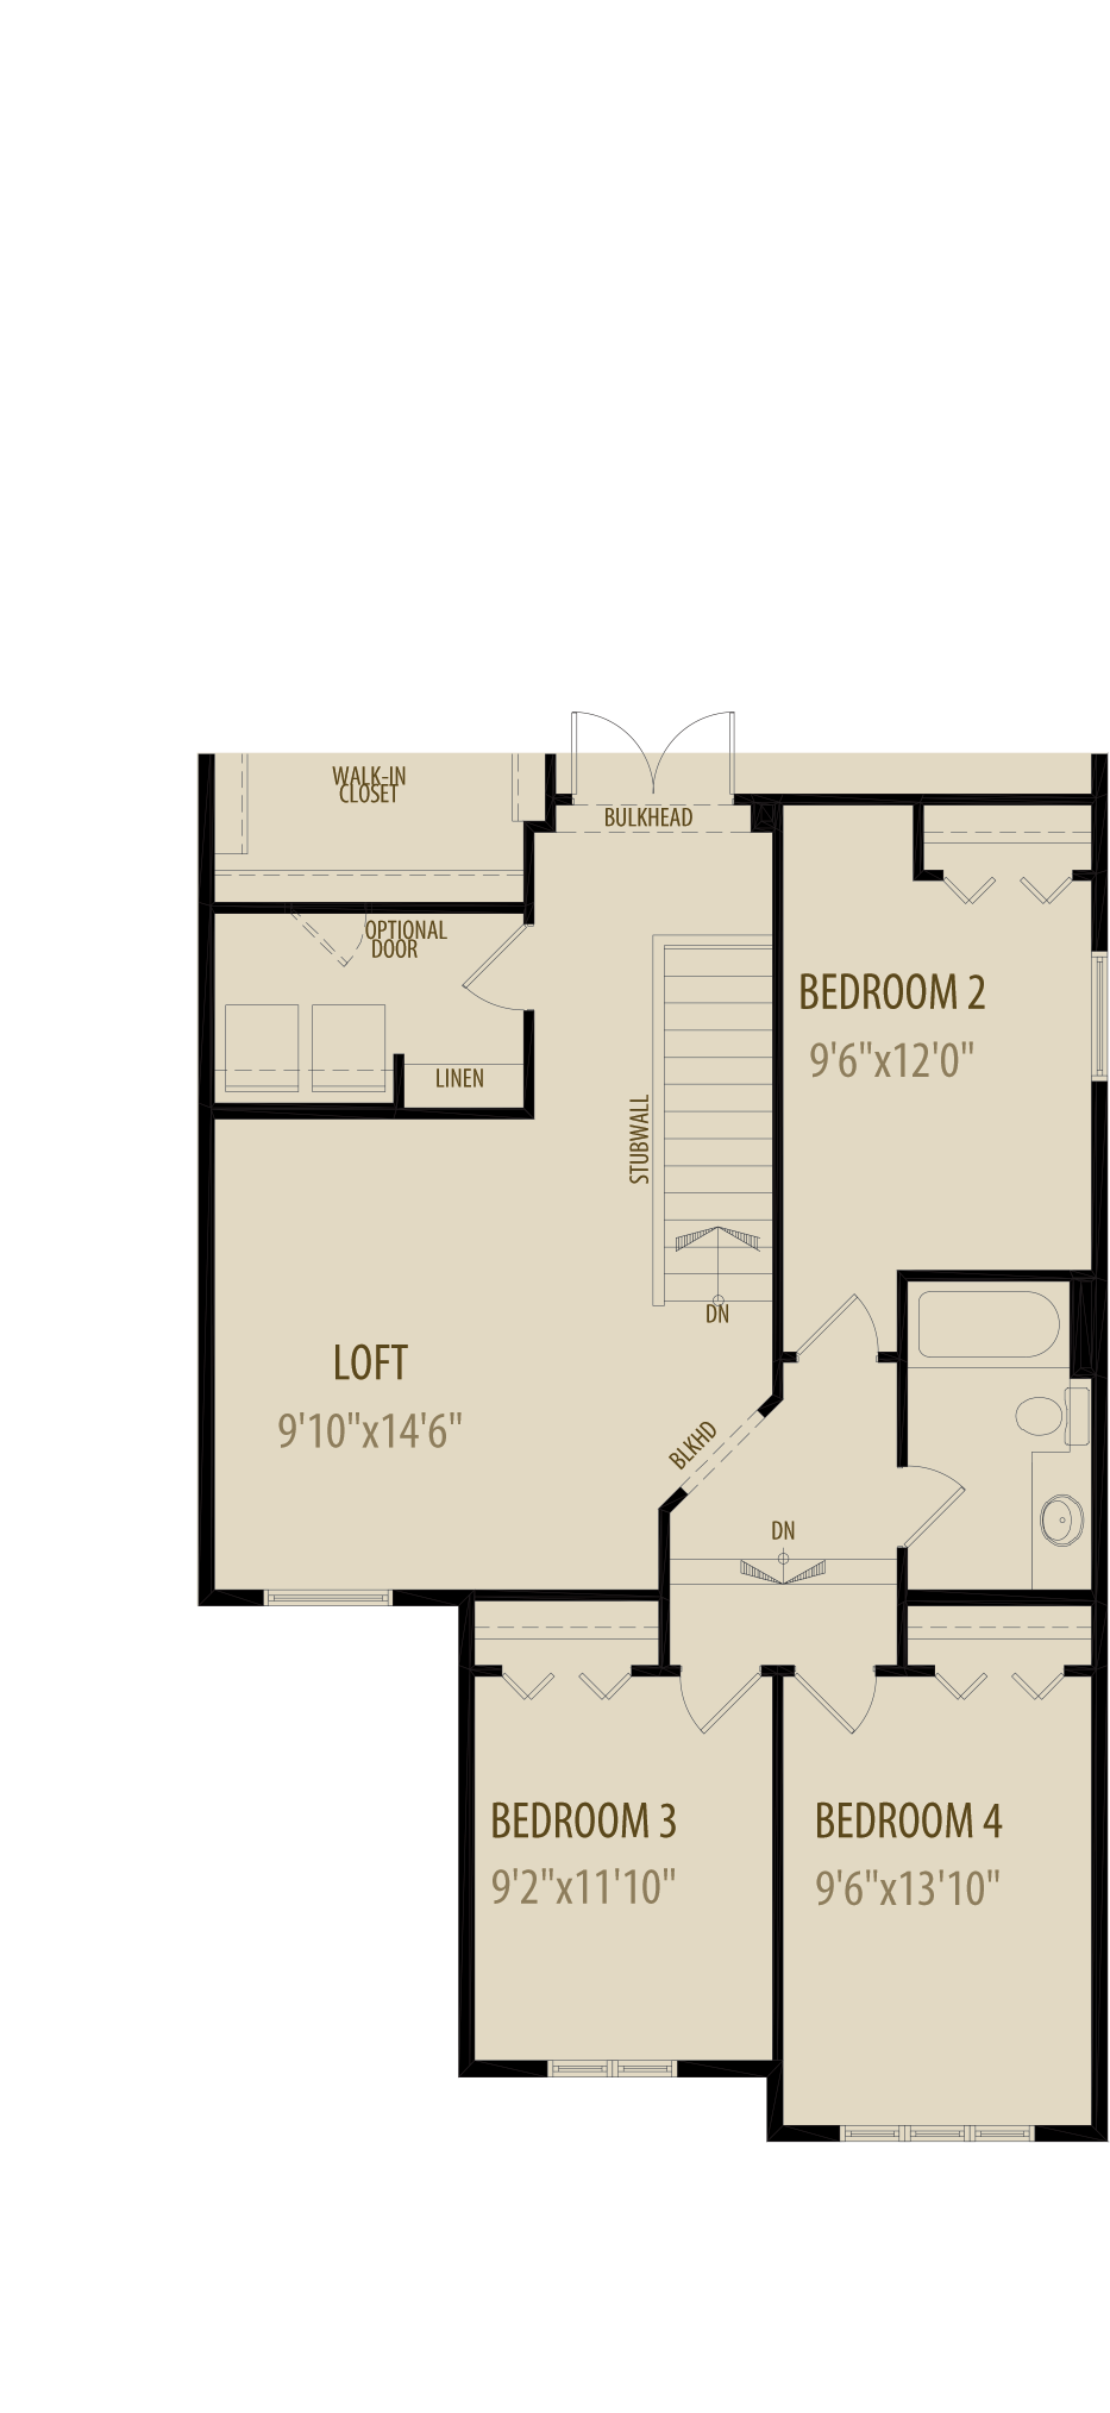 4Th Bedroom And Loft